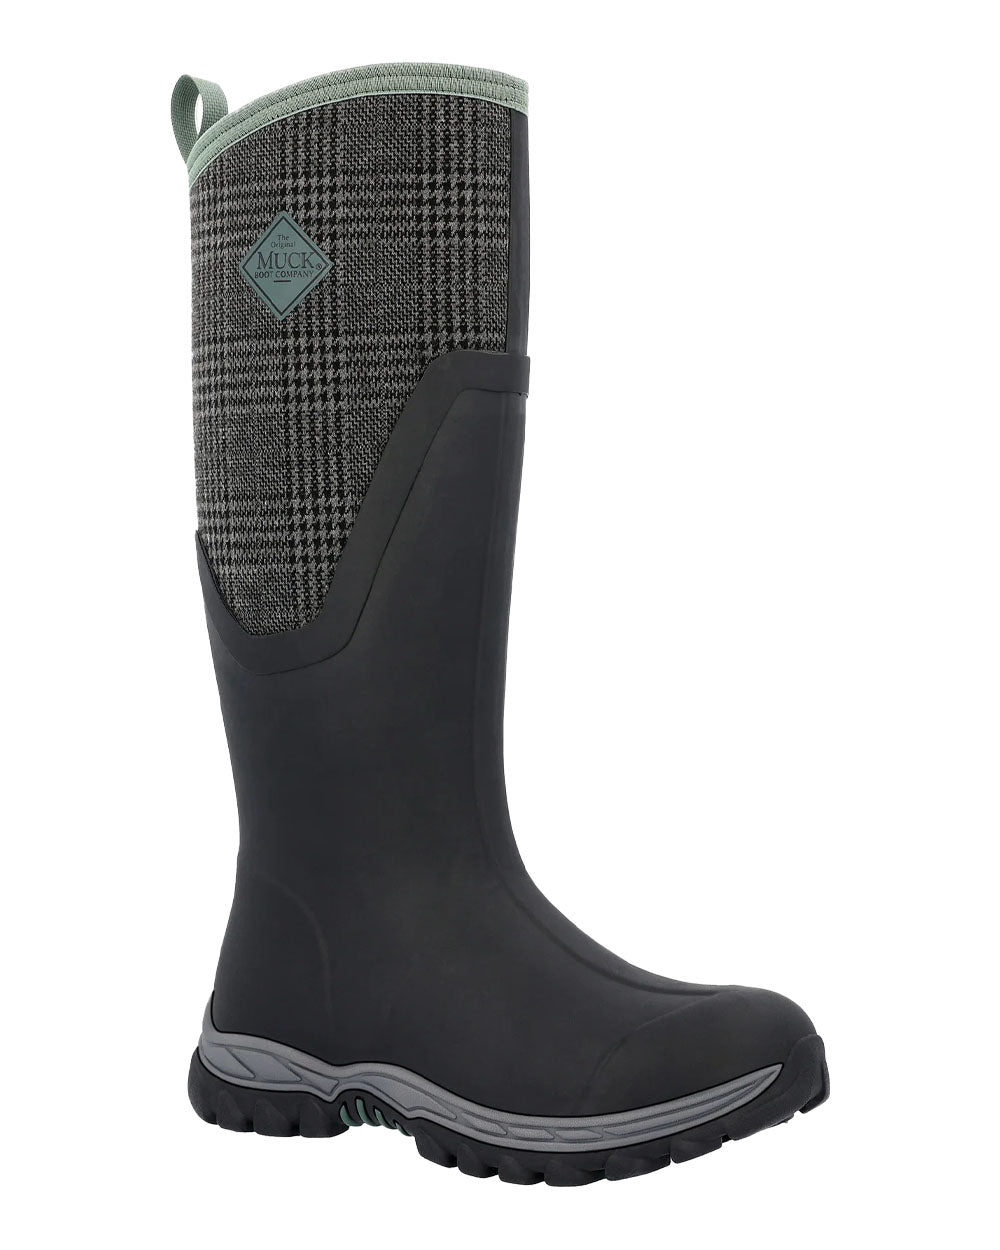 Black Plaid Print Muck Boots Womens Artic Sport II Tall Wellingtons on White background 